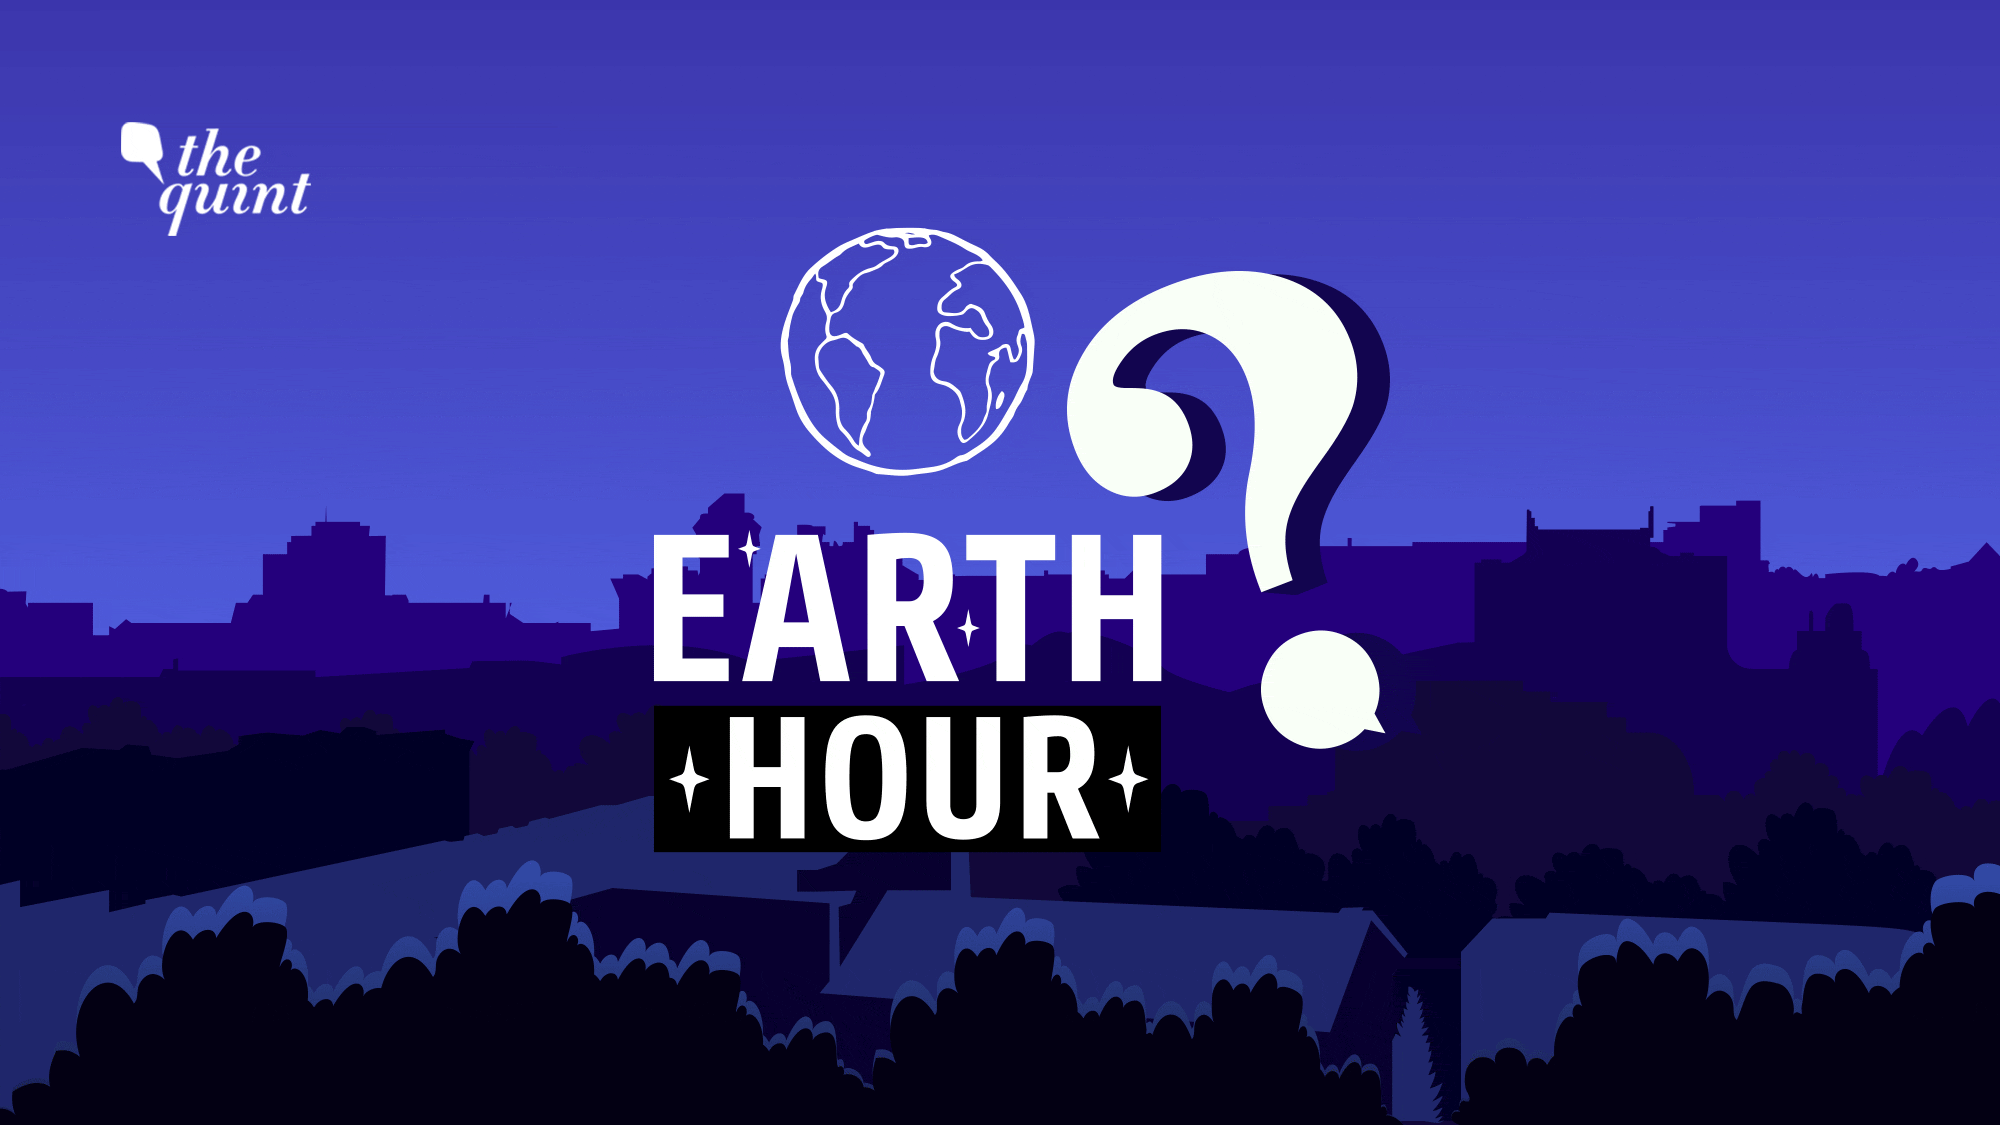 <a href="https://www.thequint.com/news/environment/explained-what-is-earth-hour-significance-of-switching-off-lights#read-more">Earth Hour 2021</a> will be observed on Saturday, 27 March, from 8:30 pm to 9:30 pm.